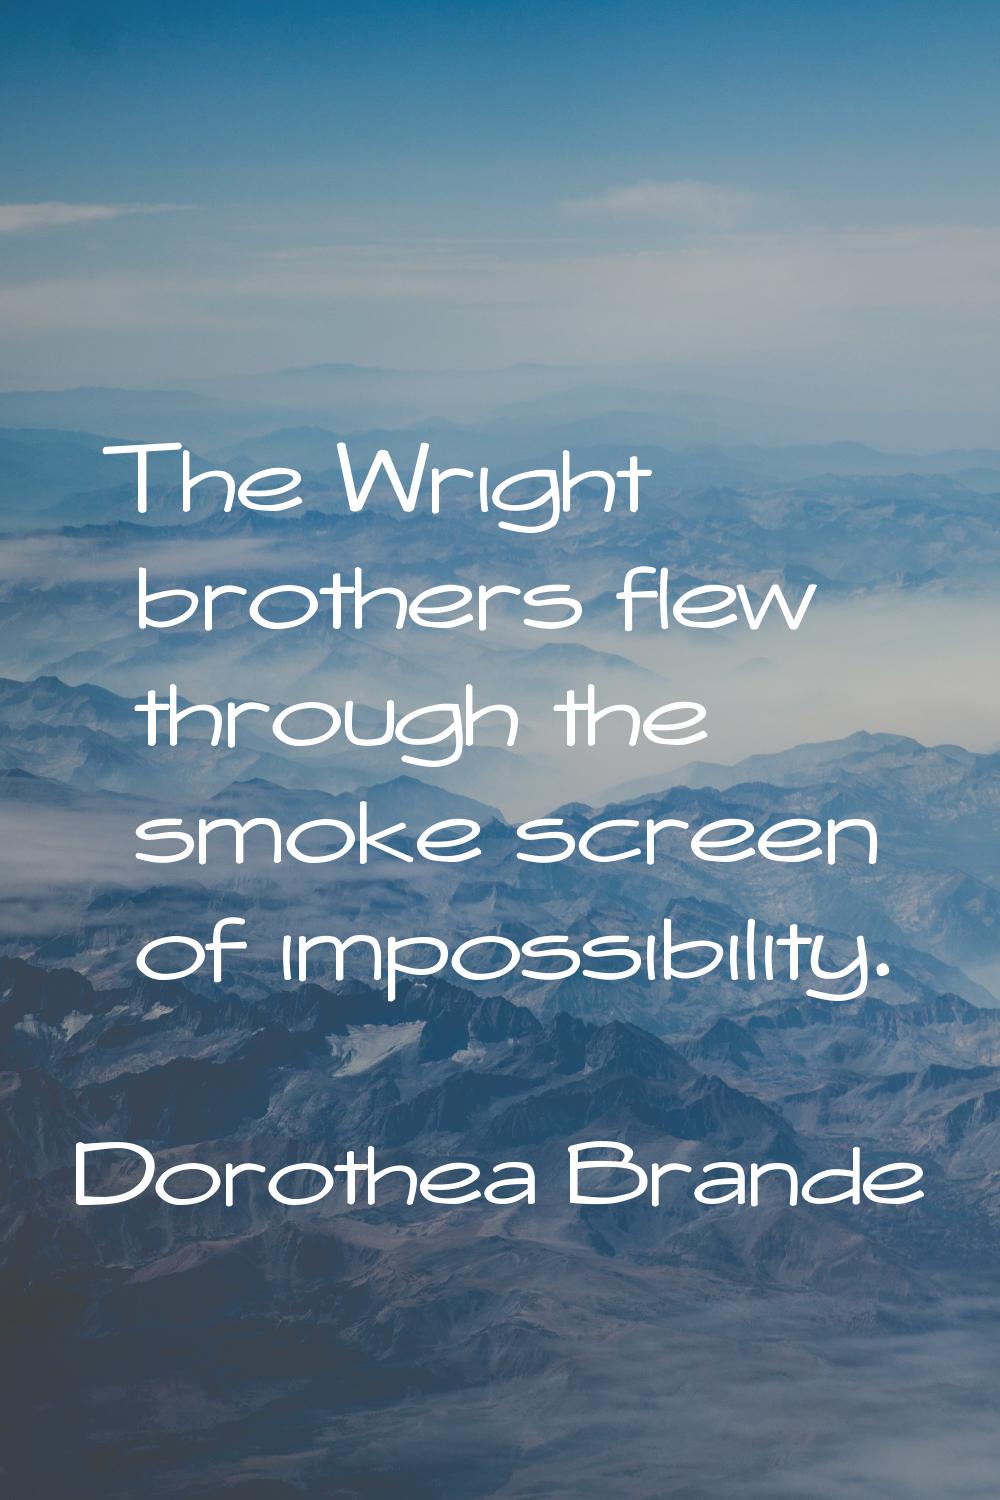 The Wright brothers flew through the smoke screen of impossibility.